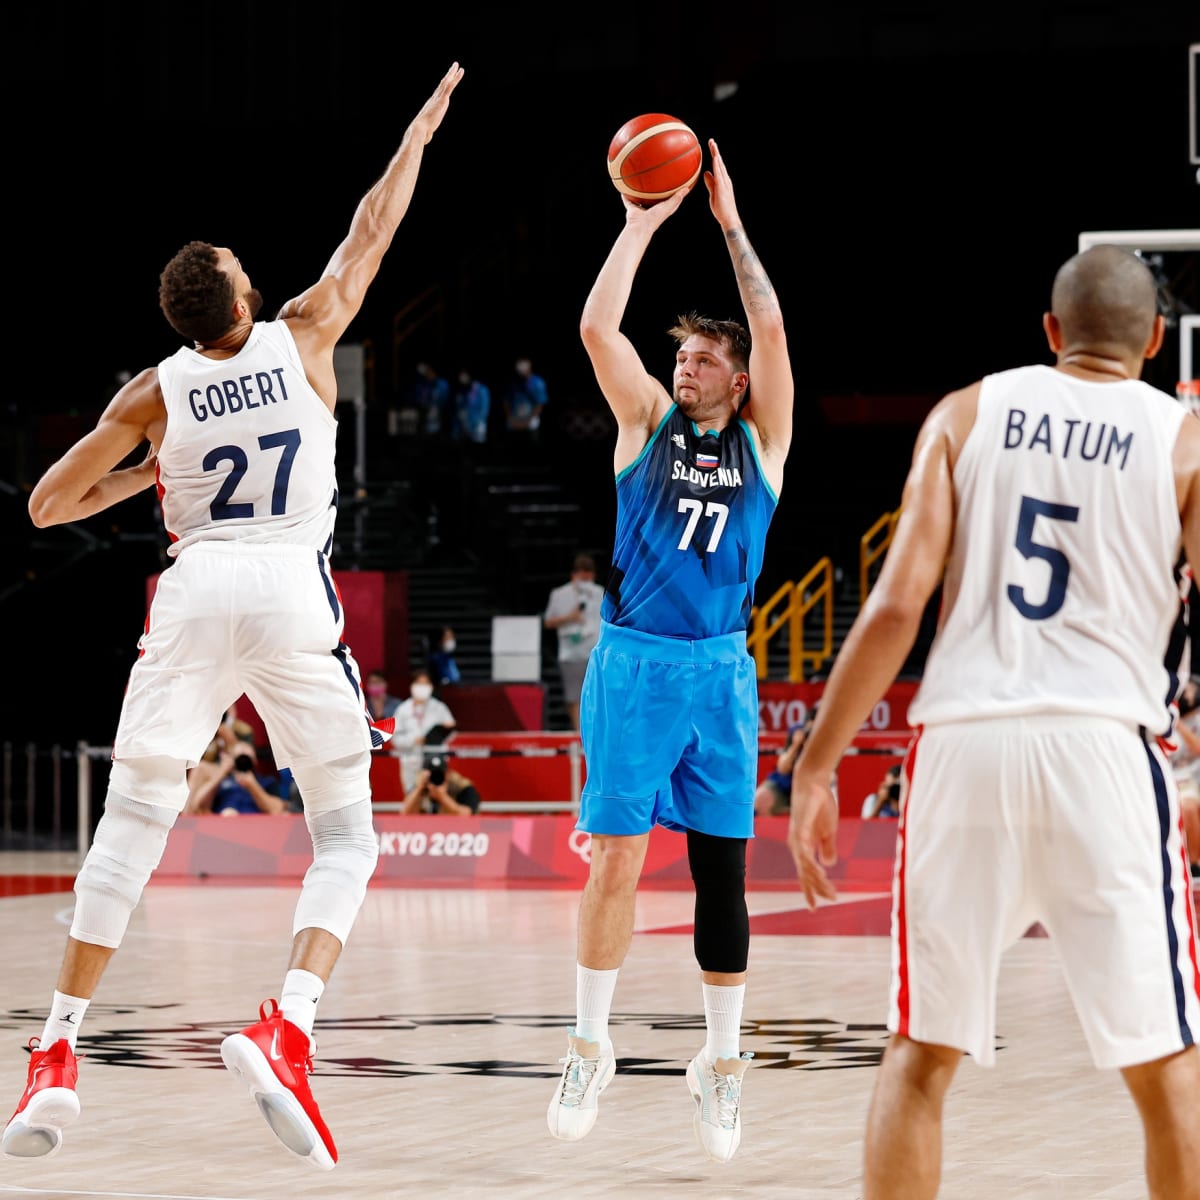 Luka Doncic focuses on Slovenia national team after the Playoffs